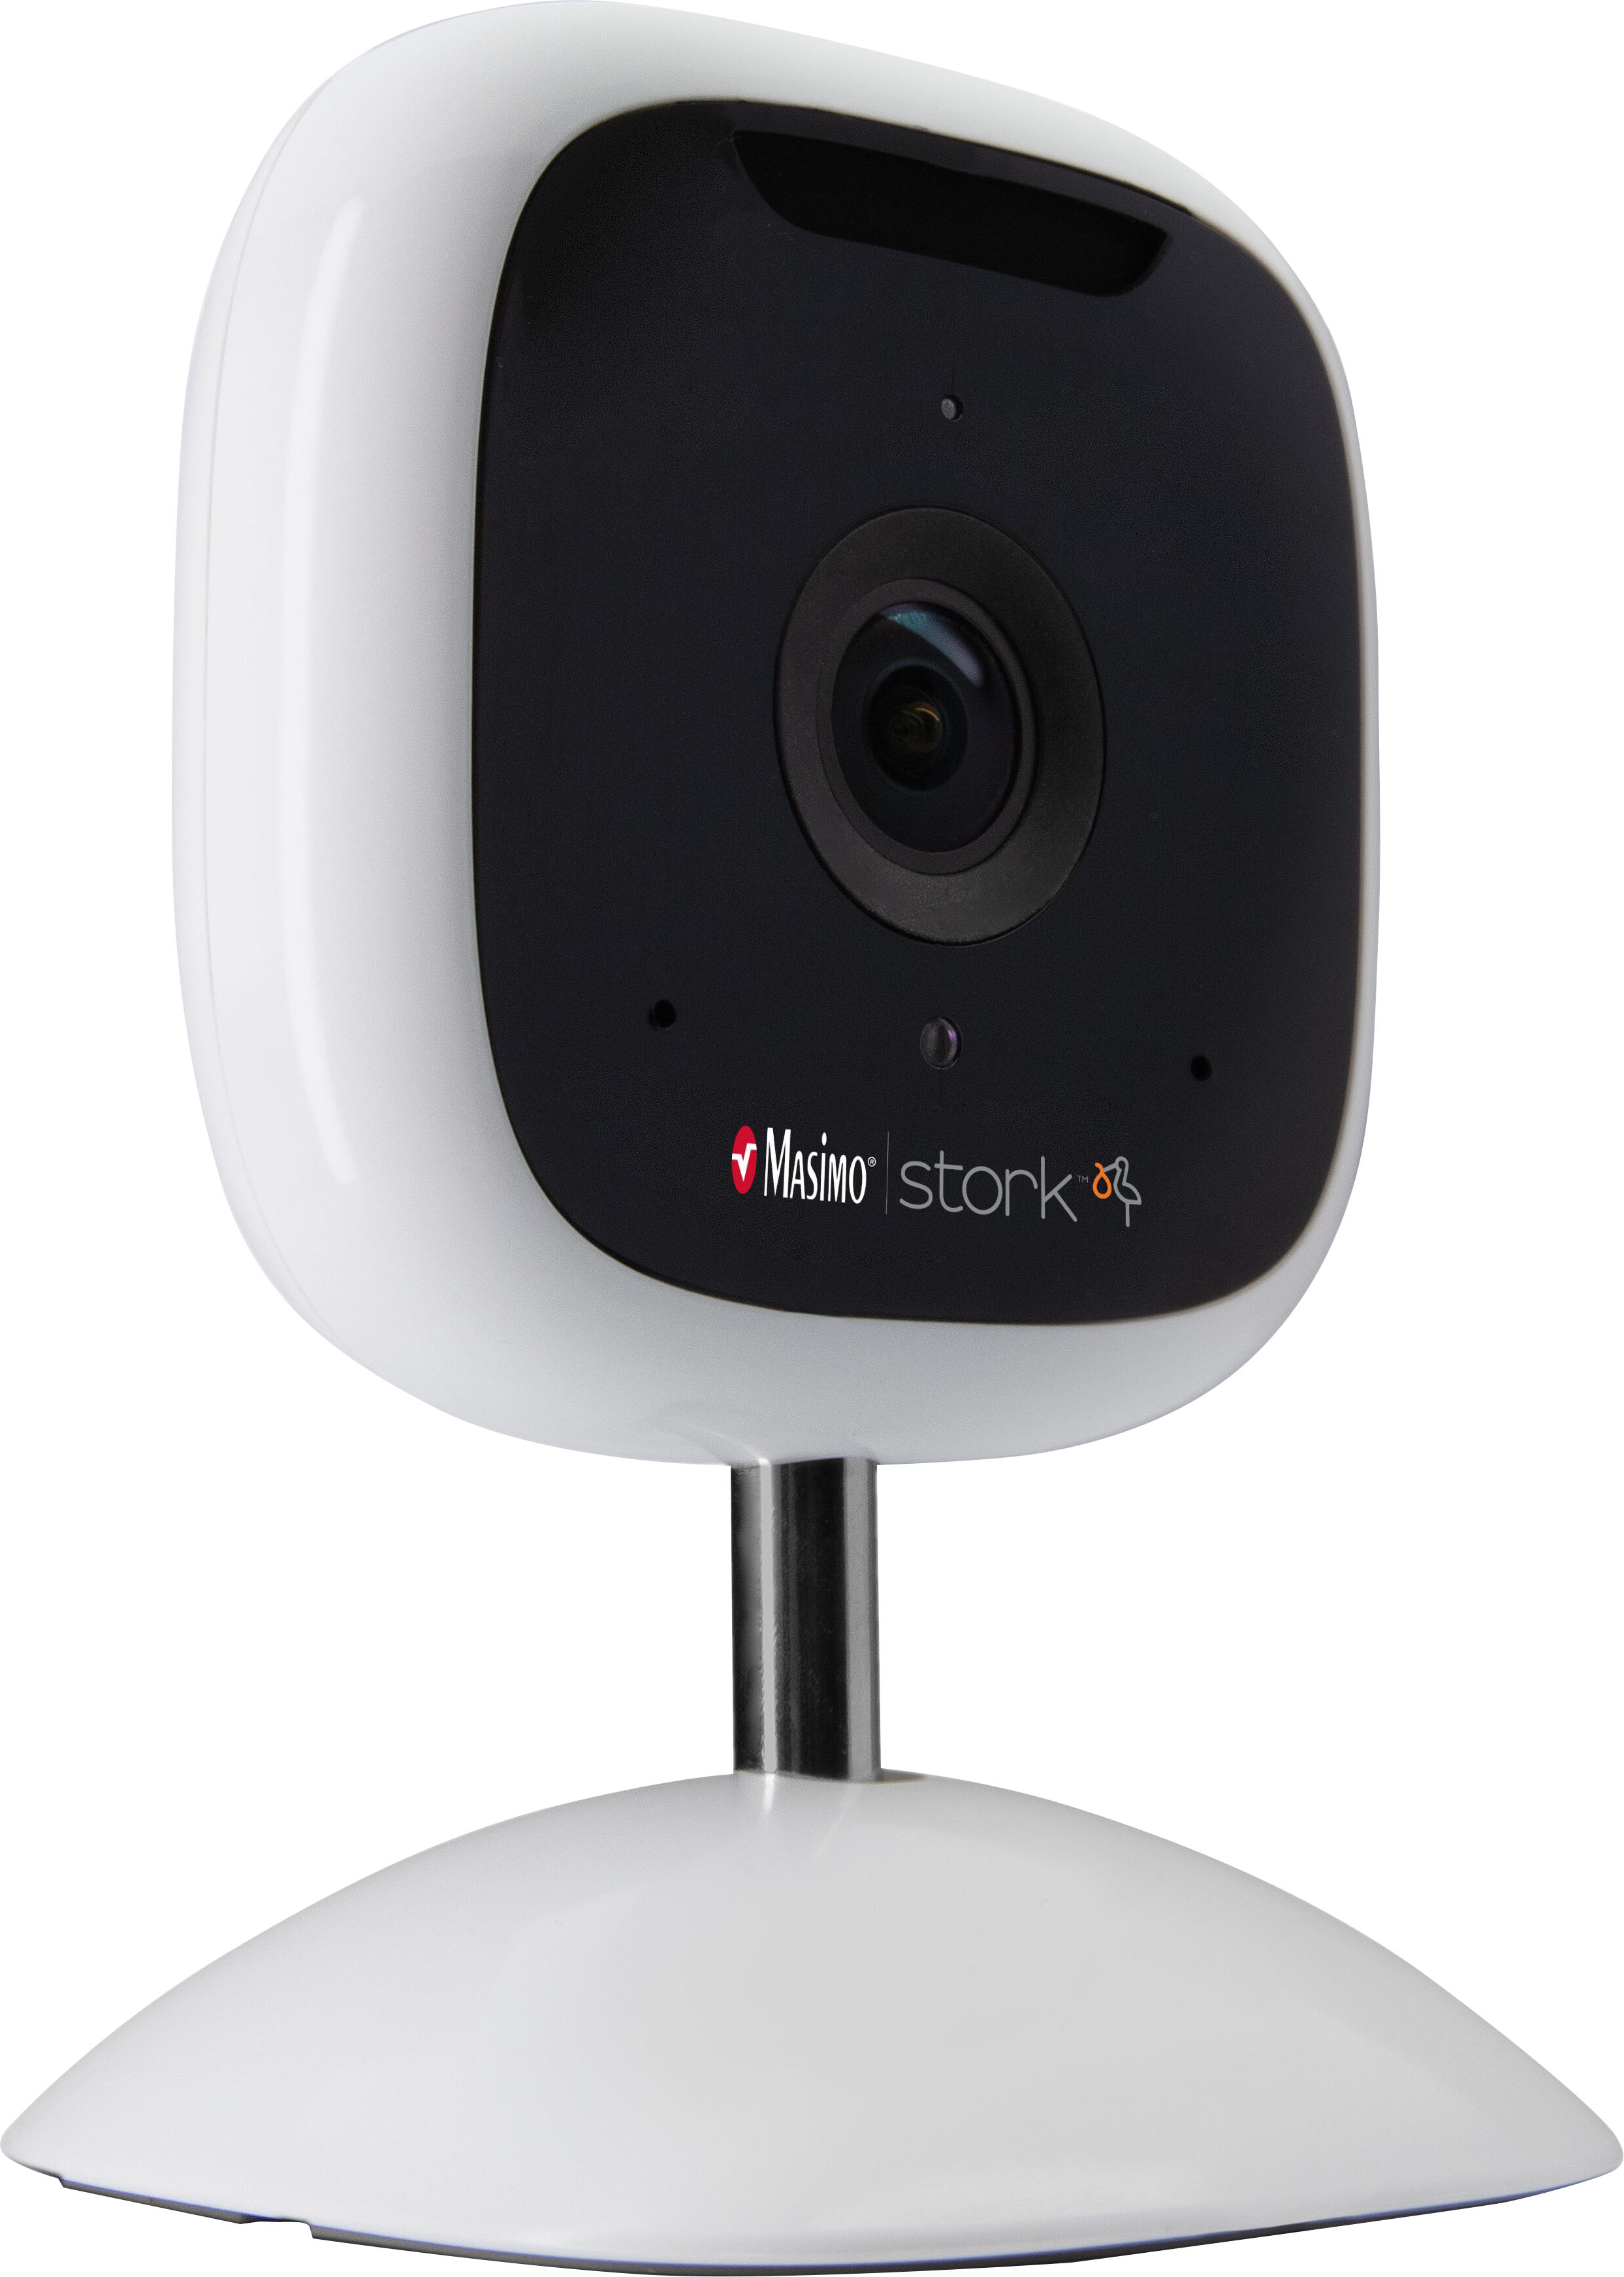 Angle View: Masimo - Stork Camera Baby Monitor with QHD-Capable Video Streaming, Two-Way Audio, and Remote Tracking via Stork App - White